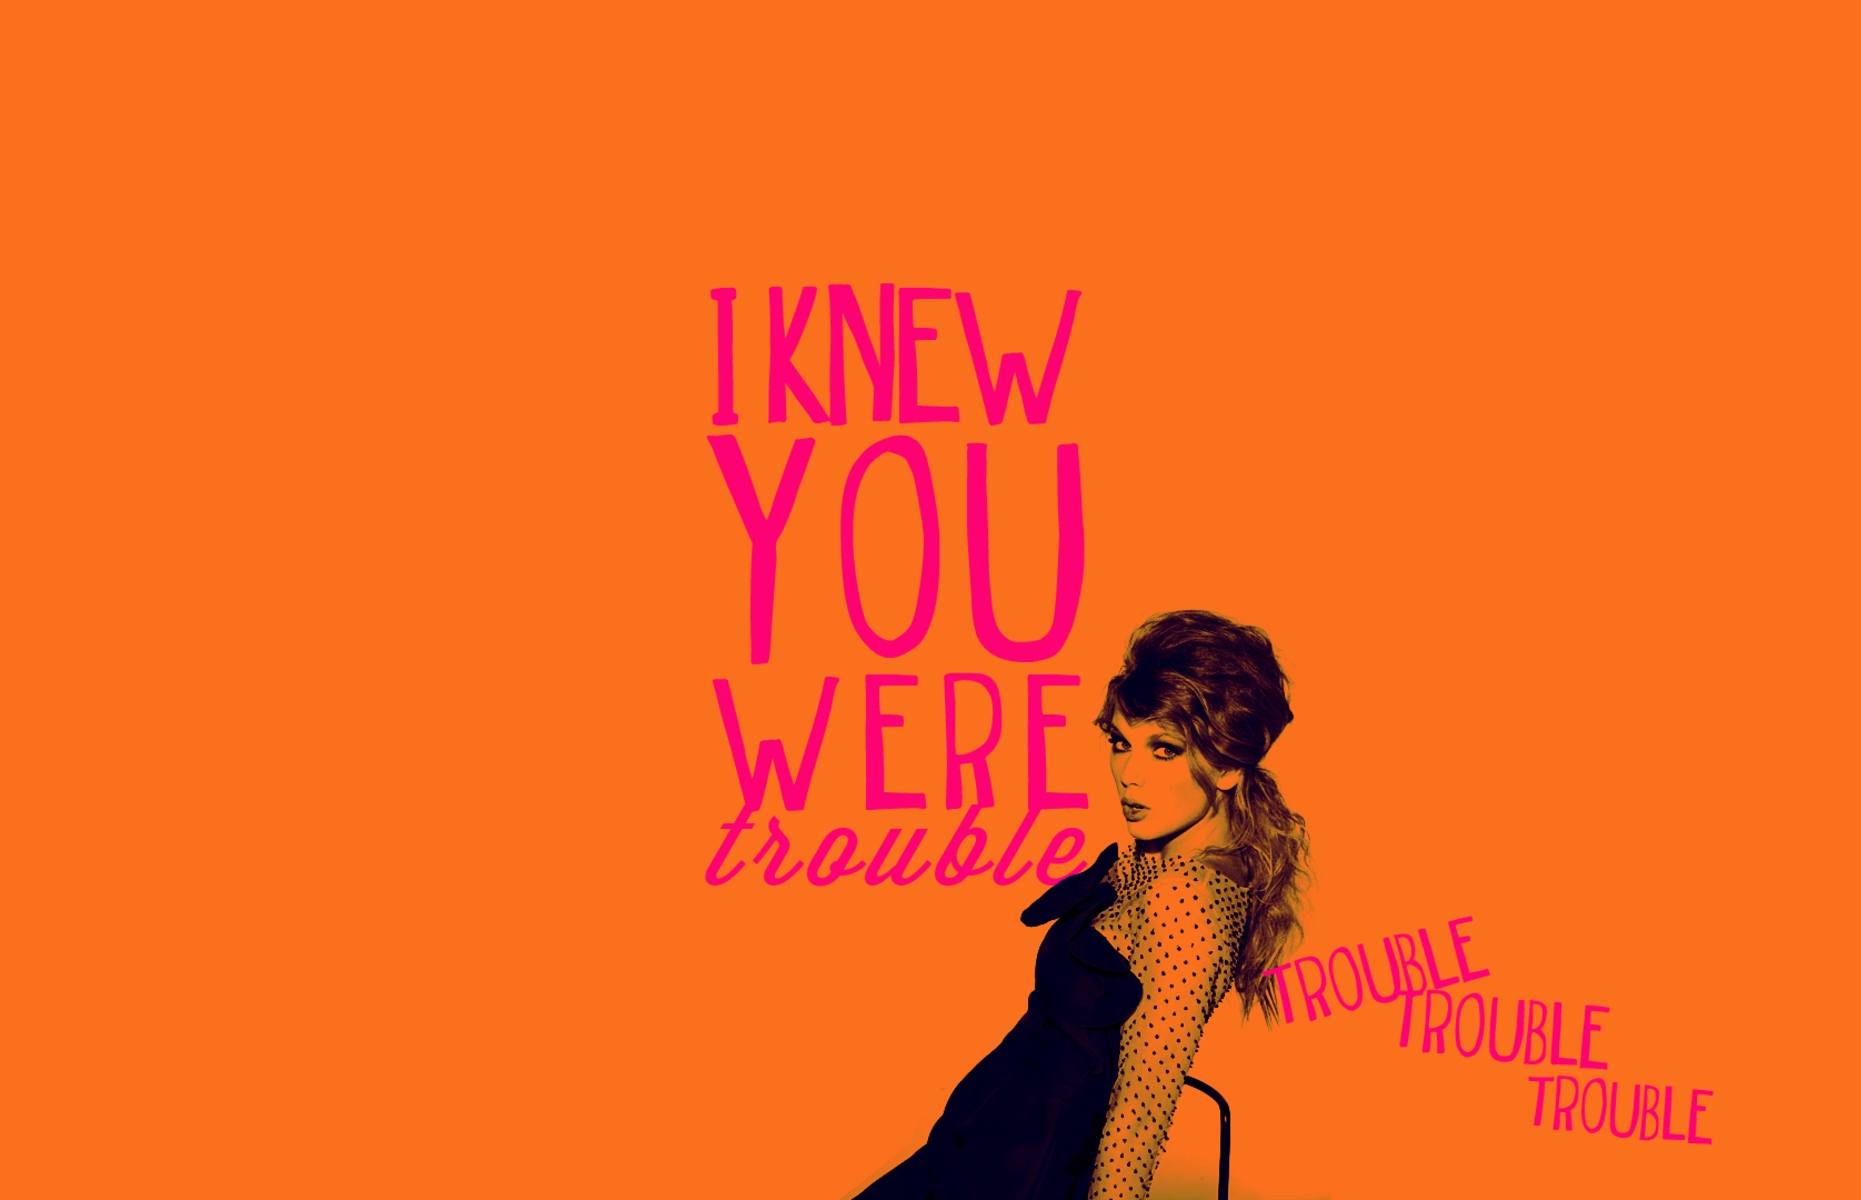 i knew you were trouble trouble trouble